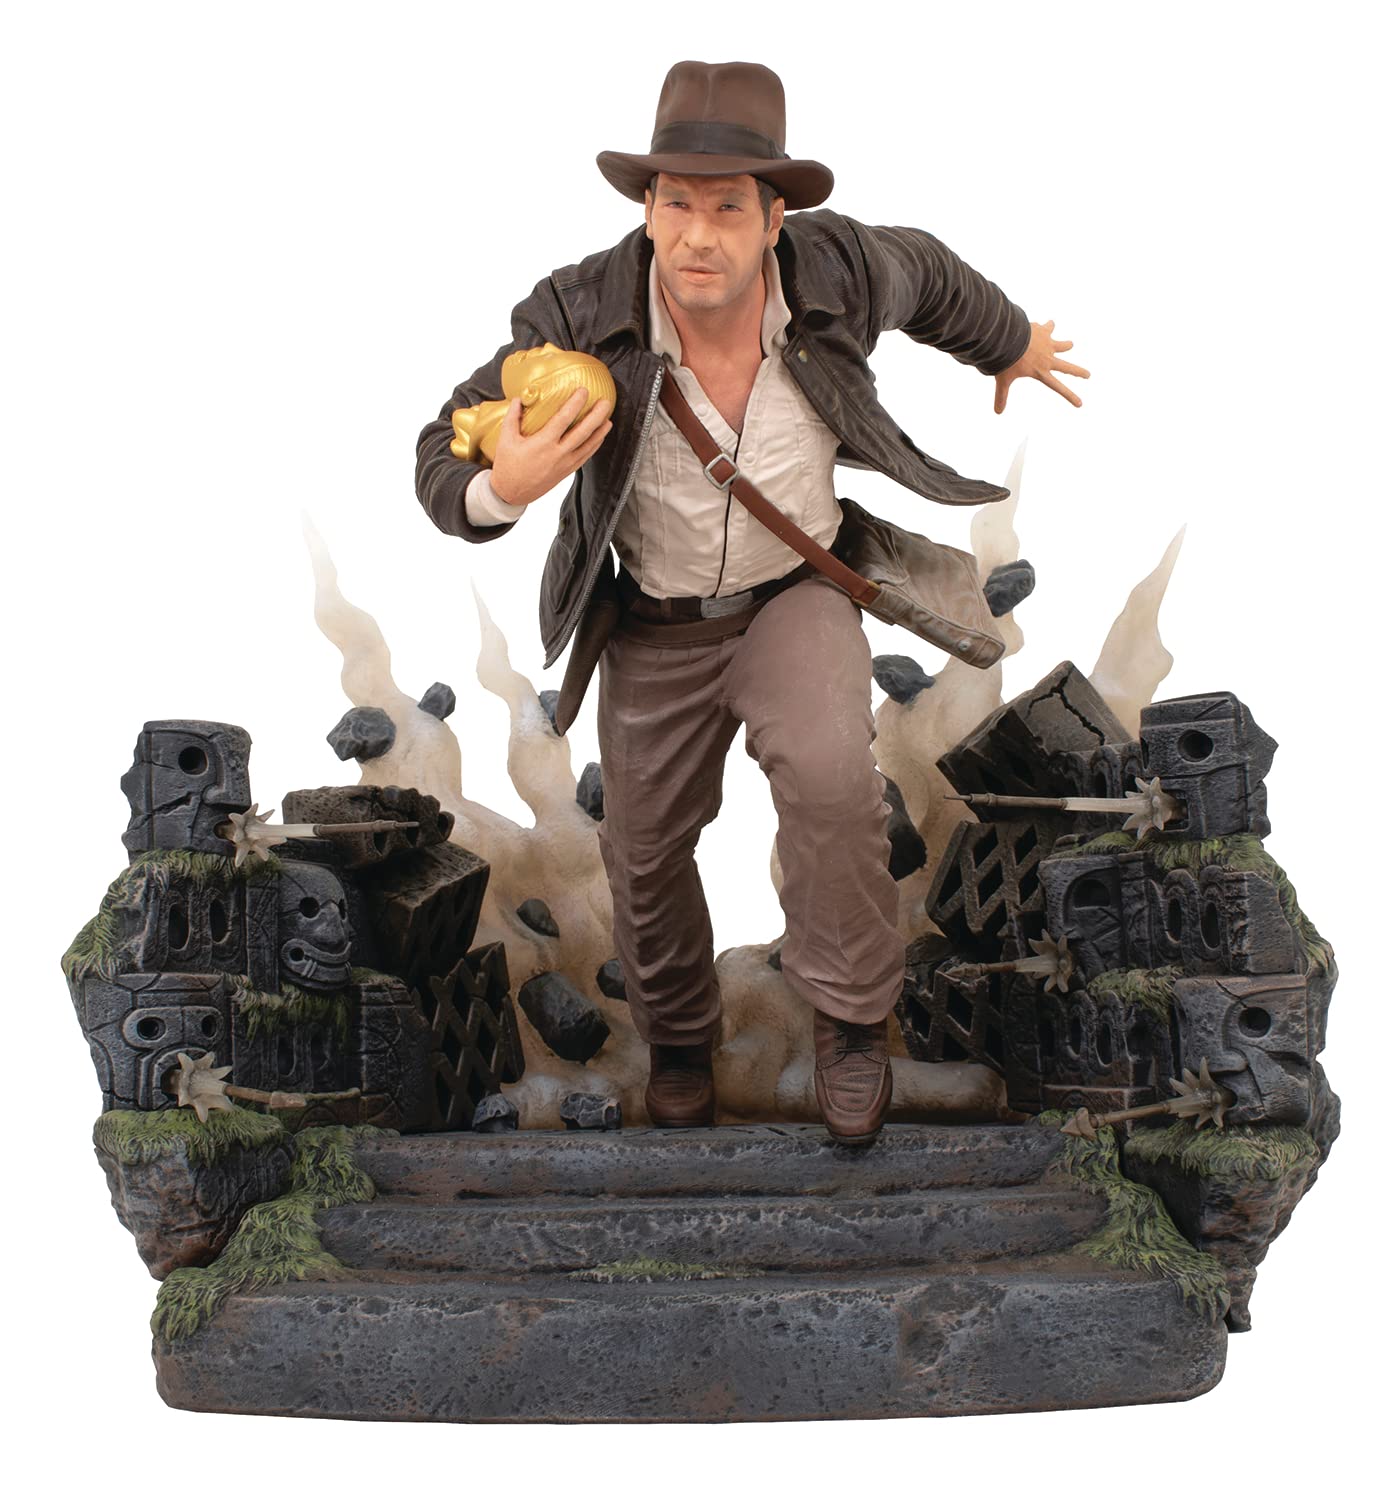 DIAMOND SELECT TOYS Indiana Jones and The Raiders of The Lost Ark: Escape with Idol Deluxe Gallery Statue